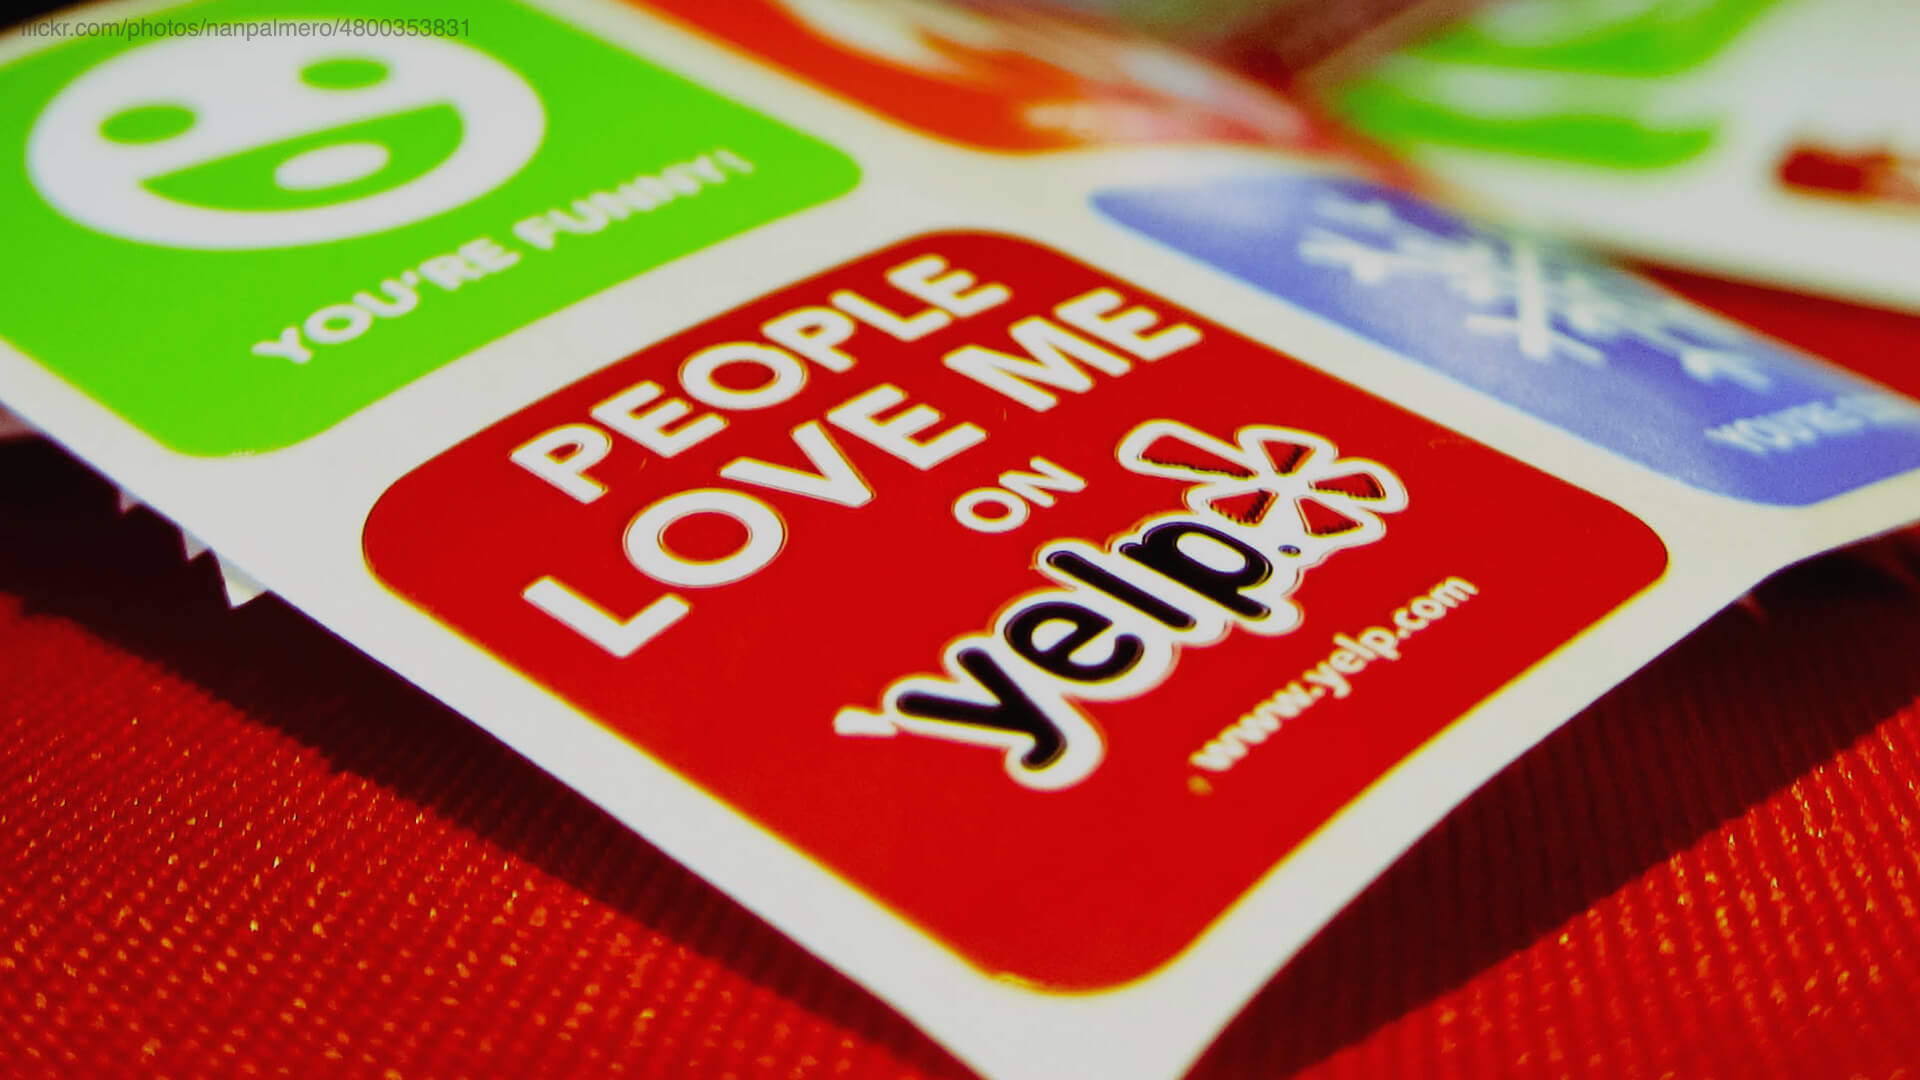 Yelp brings Ads Dashboard into Yelp for Business, debuts new ads features